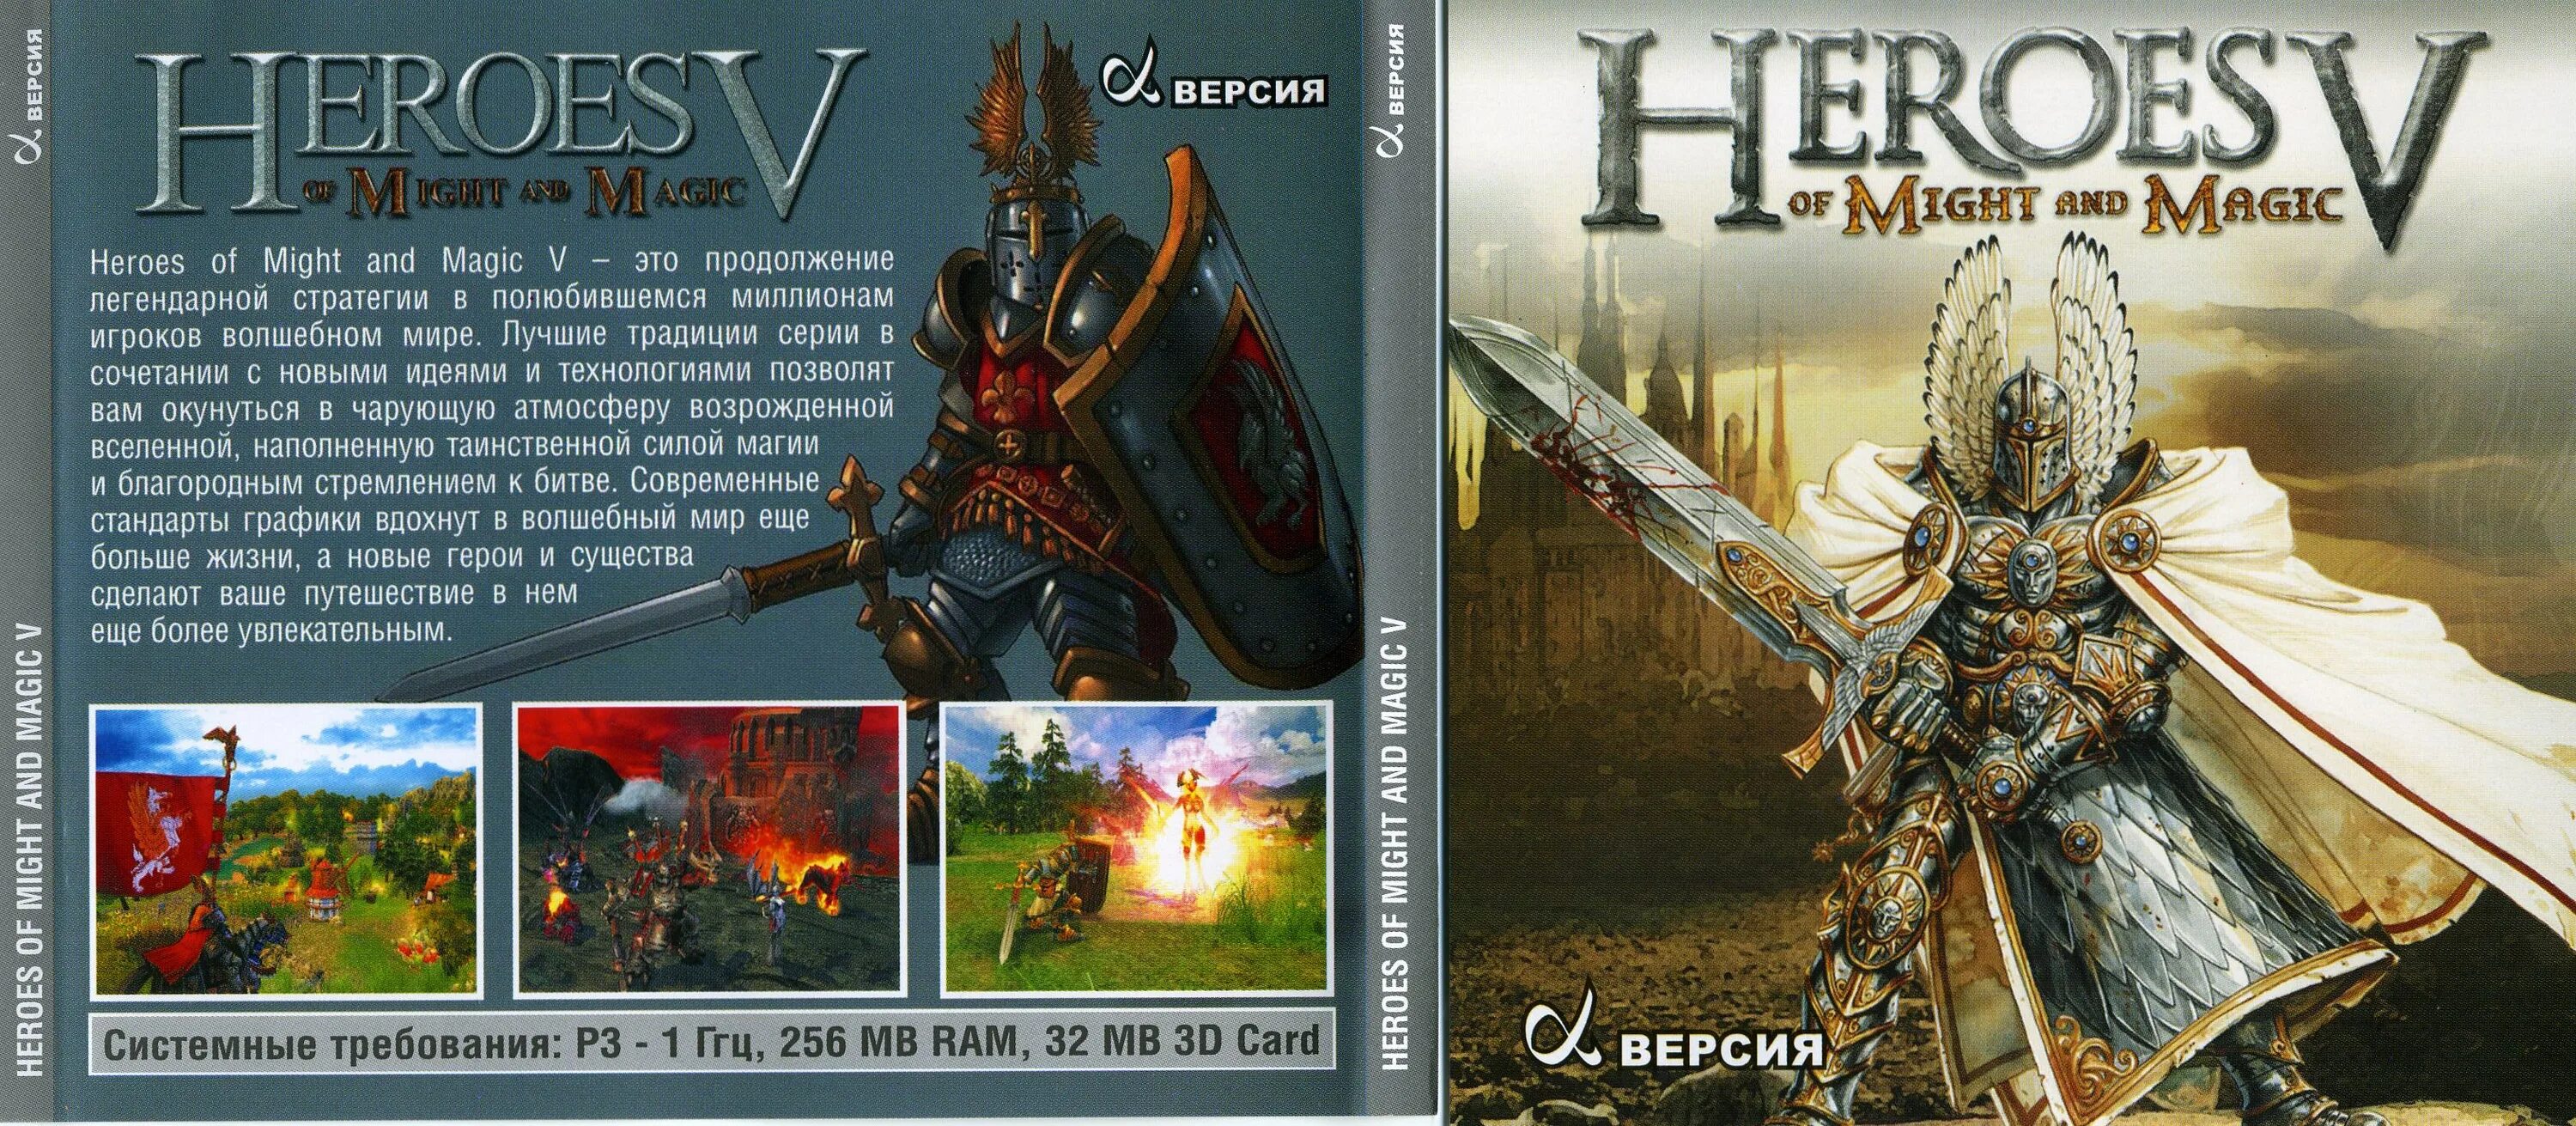 Heroes of might and Magic v диск. Heroes of might and Magic диск. Heroes of might and Magic 5 обложка. Heroes of might and Magic 5 диск.